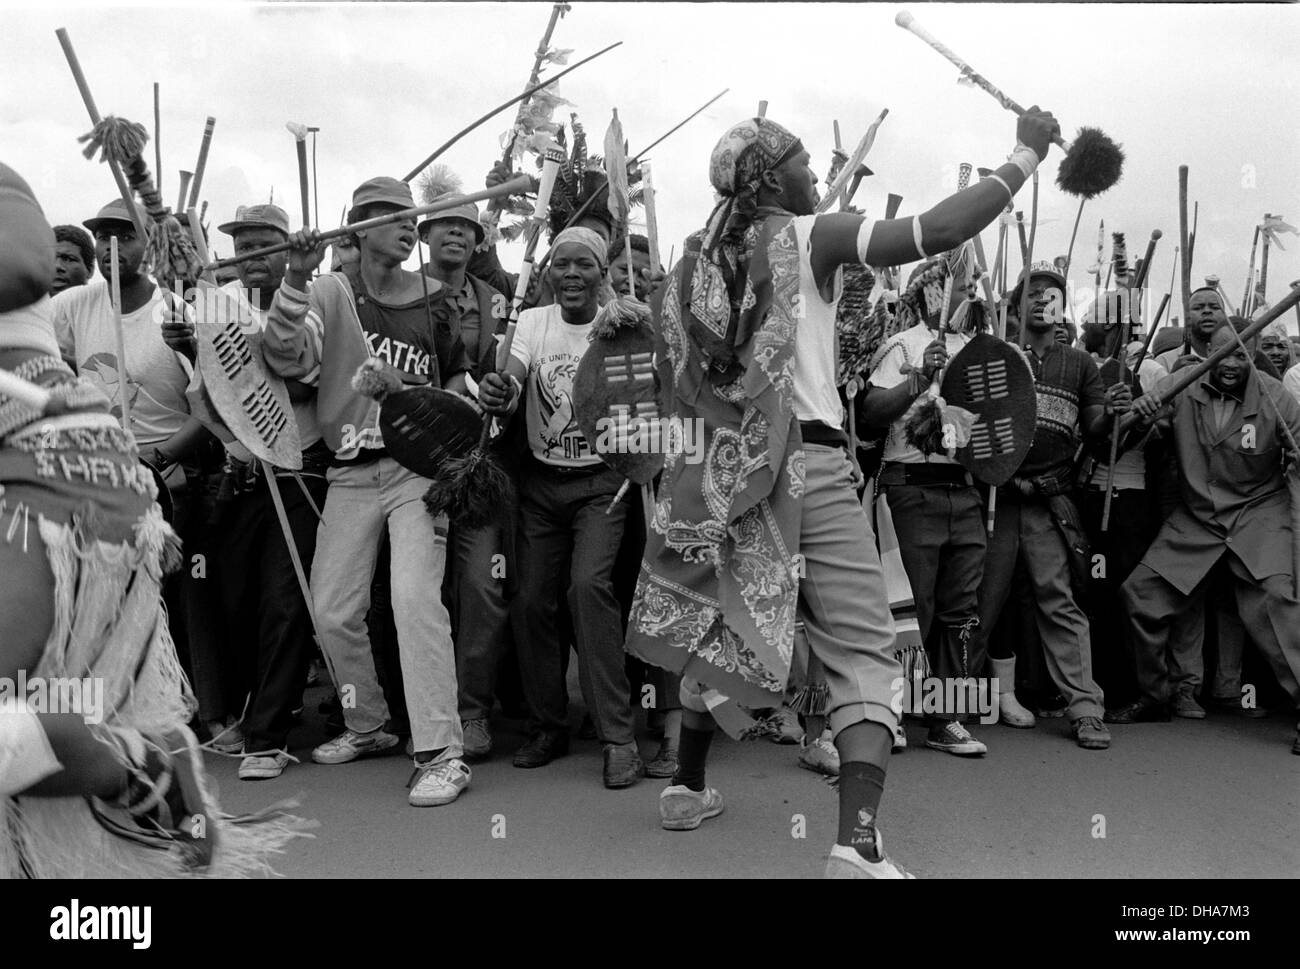 ipjr9301006401993 +- September East rand Johannesburg South Africa. Members of the IFP with their traditional weapons.. A peace Stock Photo